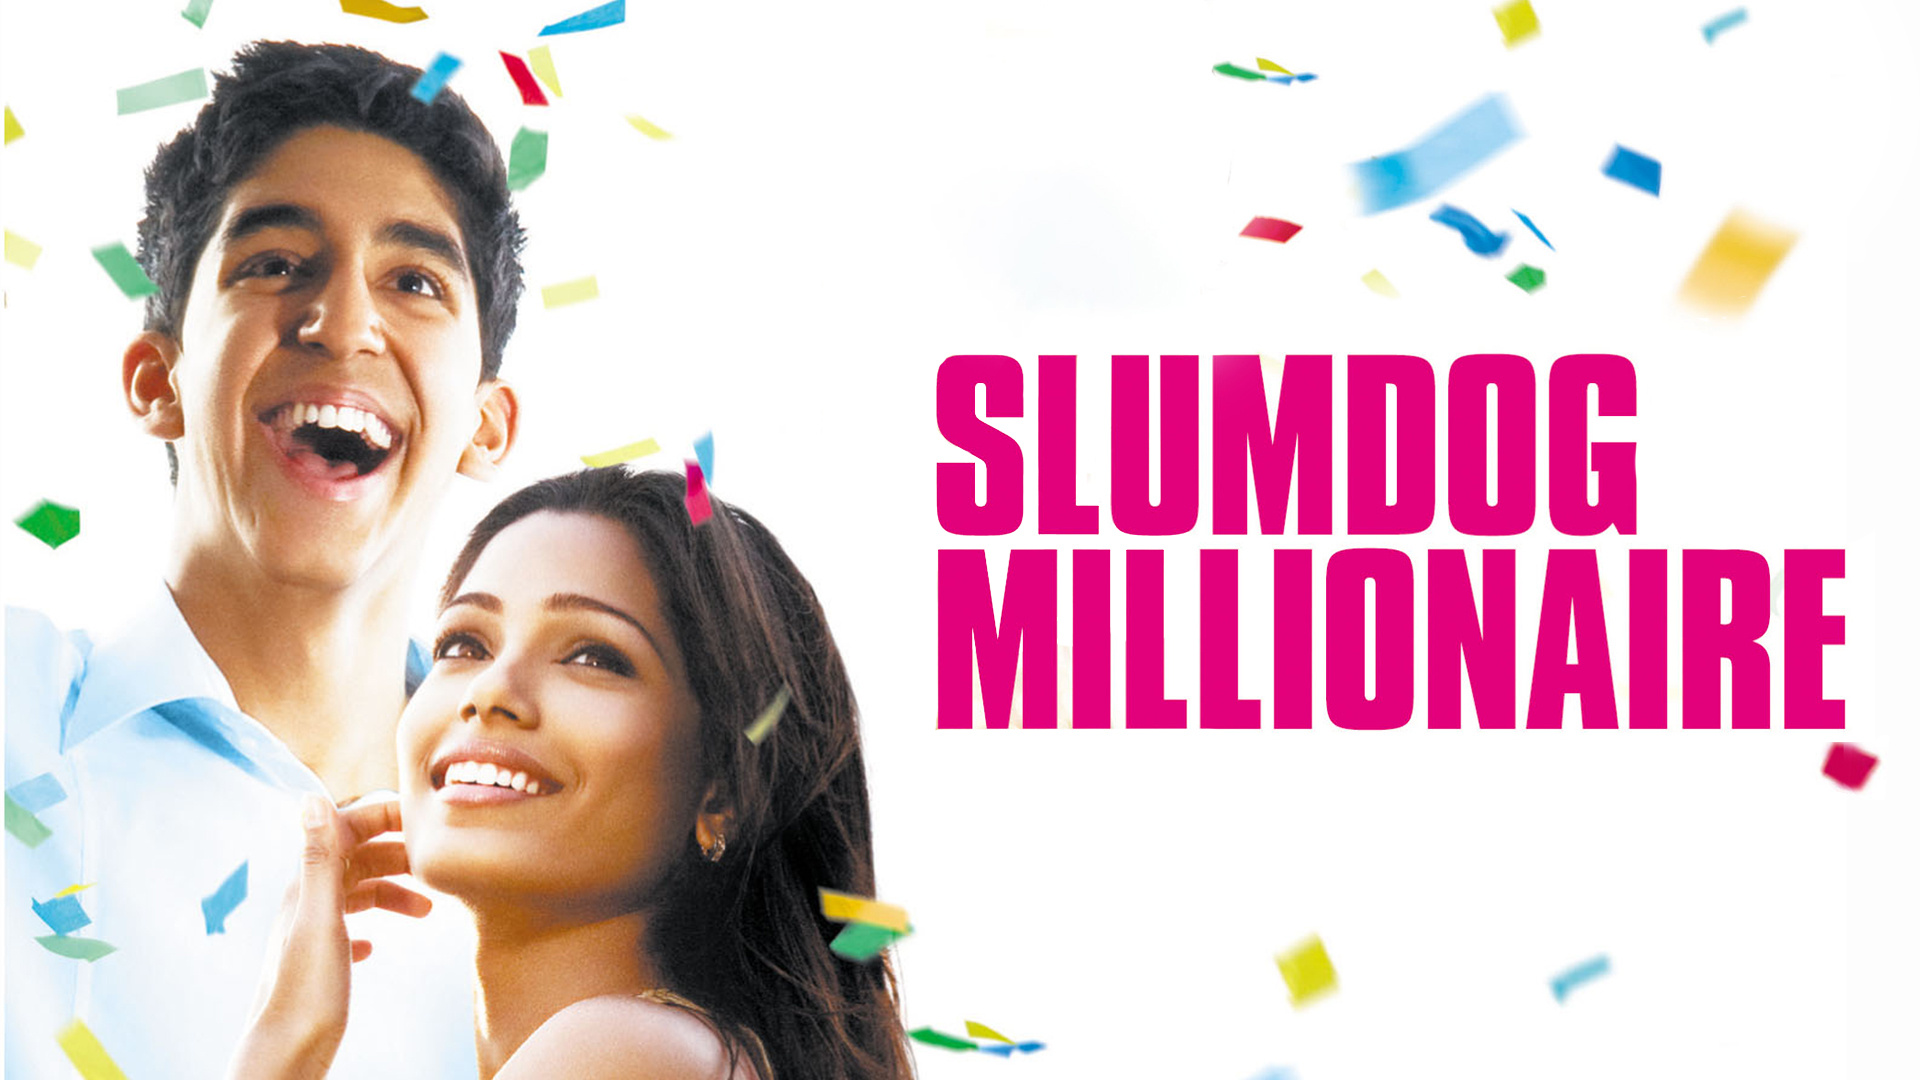 Slumdog Millionaire: A.R. Rahman took 20 days to compose the entire soundtrack. 1920x1080 Full HD Background.